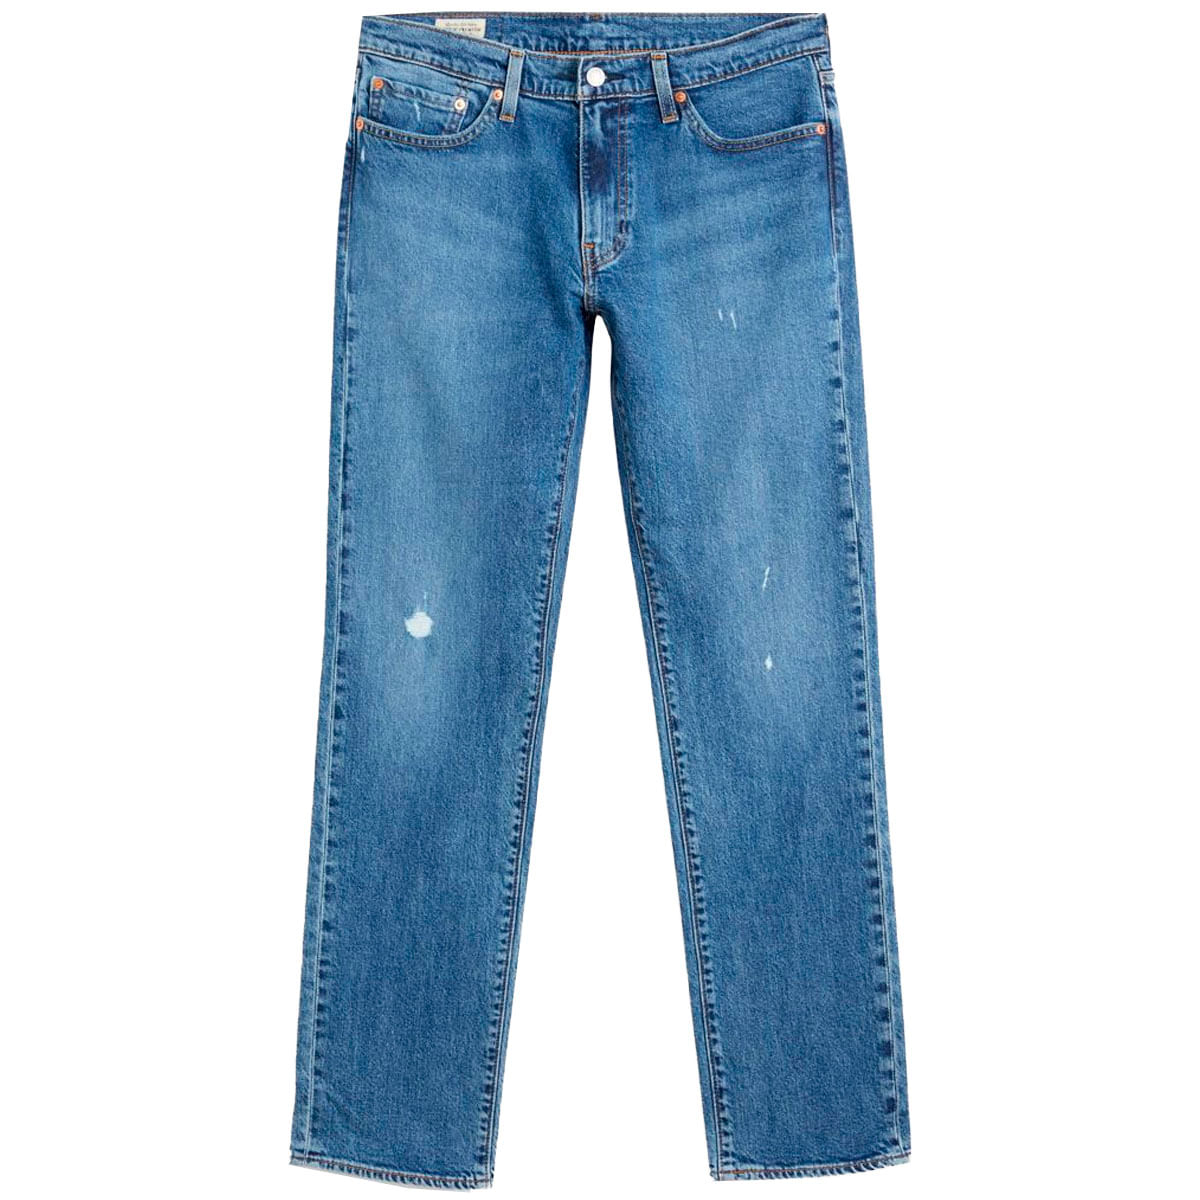 Levi's - 511 Slim jeans with abrasions on Arteni.it